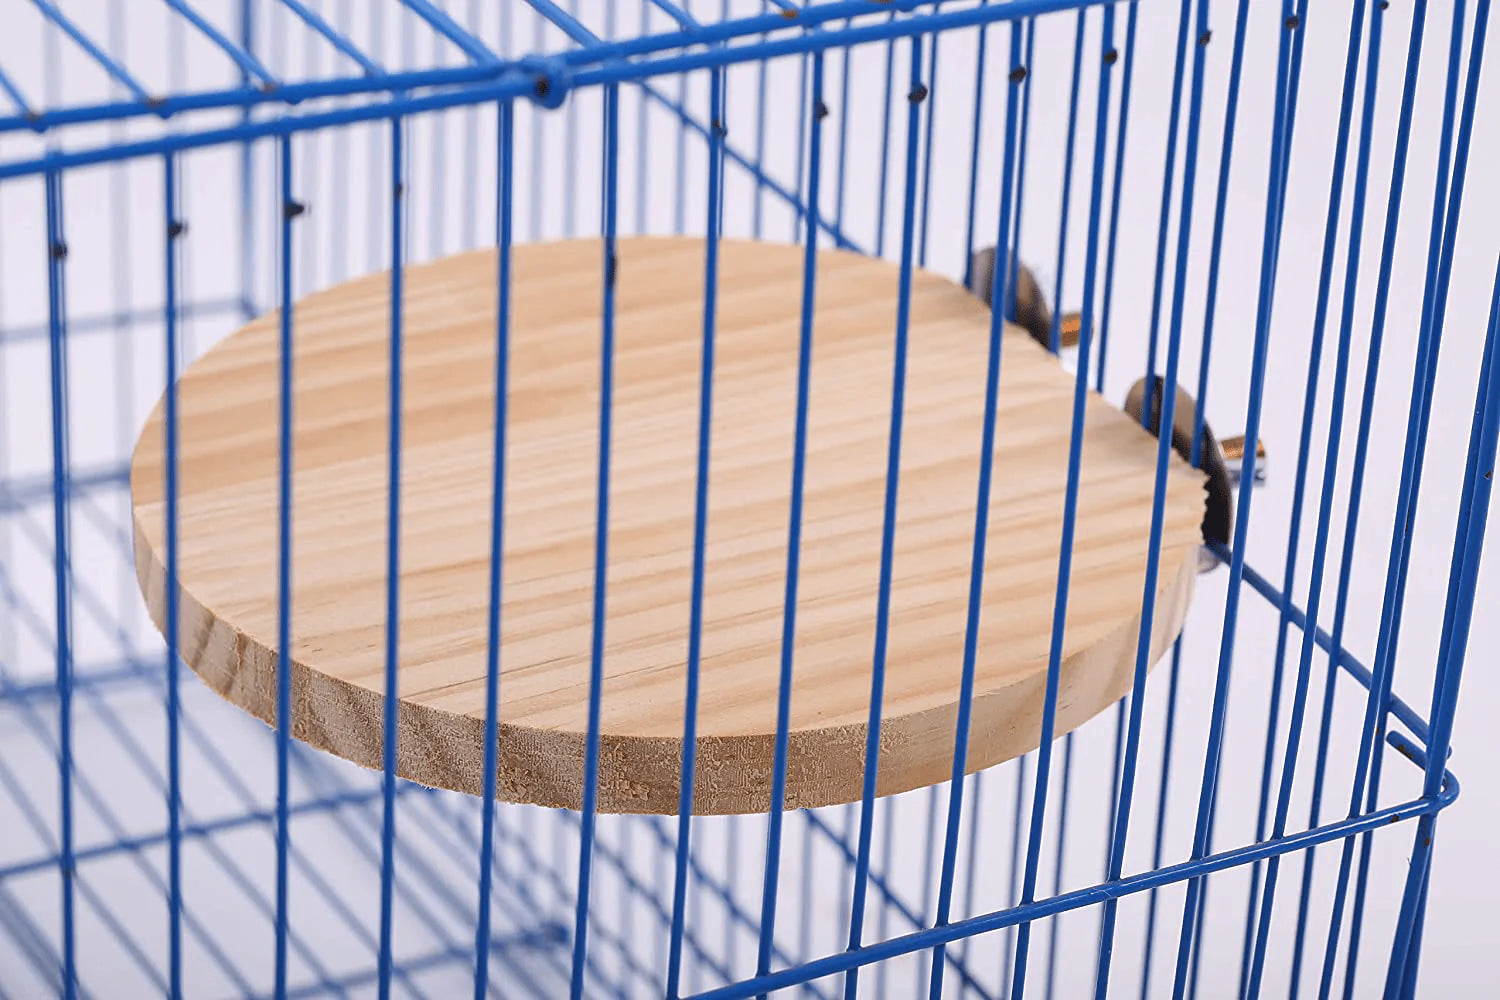 ZARYIEEO 3 Pcs Hamster Stand Platform, Natural Wood Bird Activity Playground for Animal Exercise, Cage Accessories Perch Ledge Shelf Board for Squirrel Rabbit Chinchilla Parrot Mouse Rat Gerbil Dwarf Animals & Pet Supplies > Pet Supplies > Bird Supplies > Bird Cage Accessories ZARYIEEO   